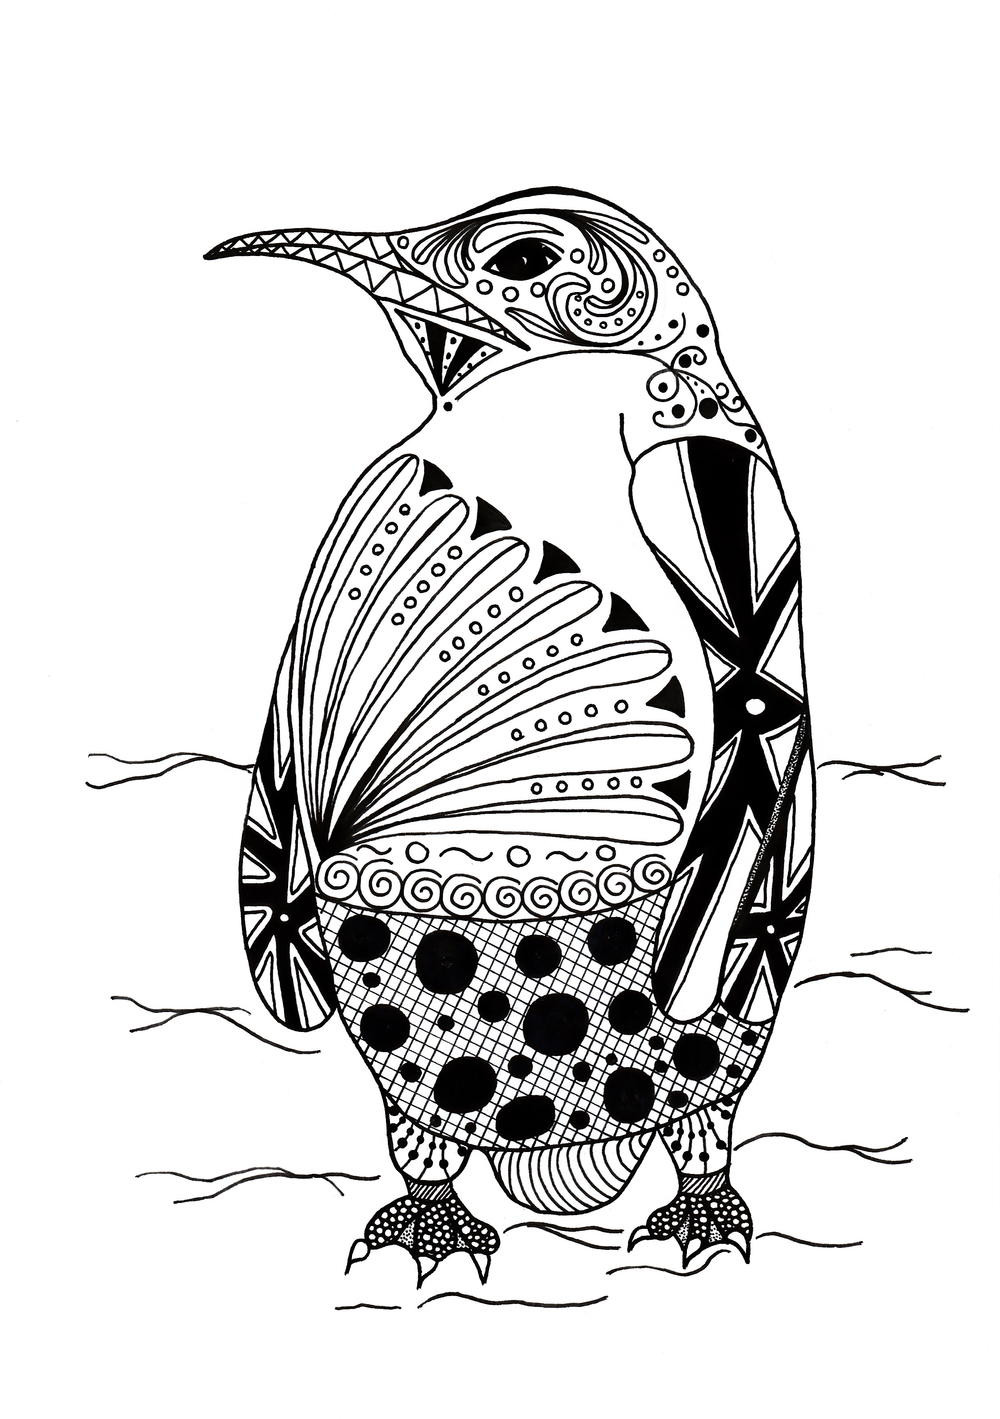 Printable Adult Coloring Book
 Intricate Penguin Adult Coloring Page